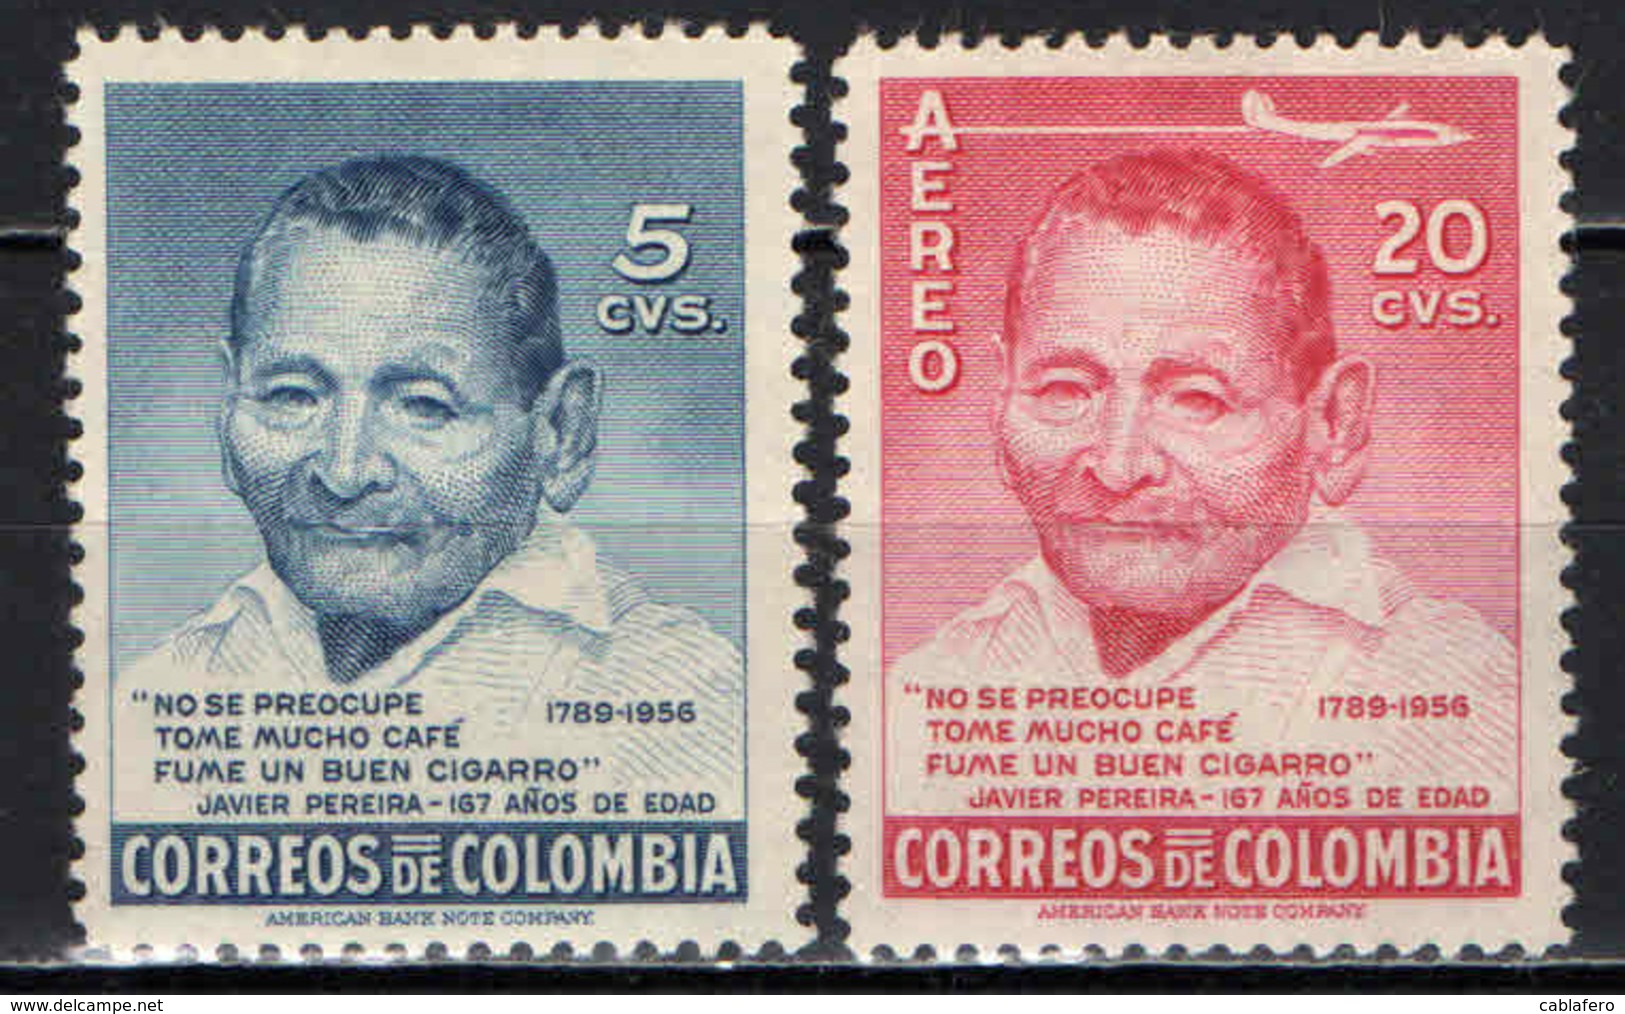 COLOMBIA - 1956 - JAVIER PEREIRA - MNH - Colombia